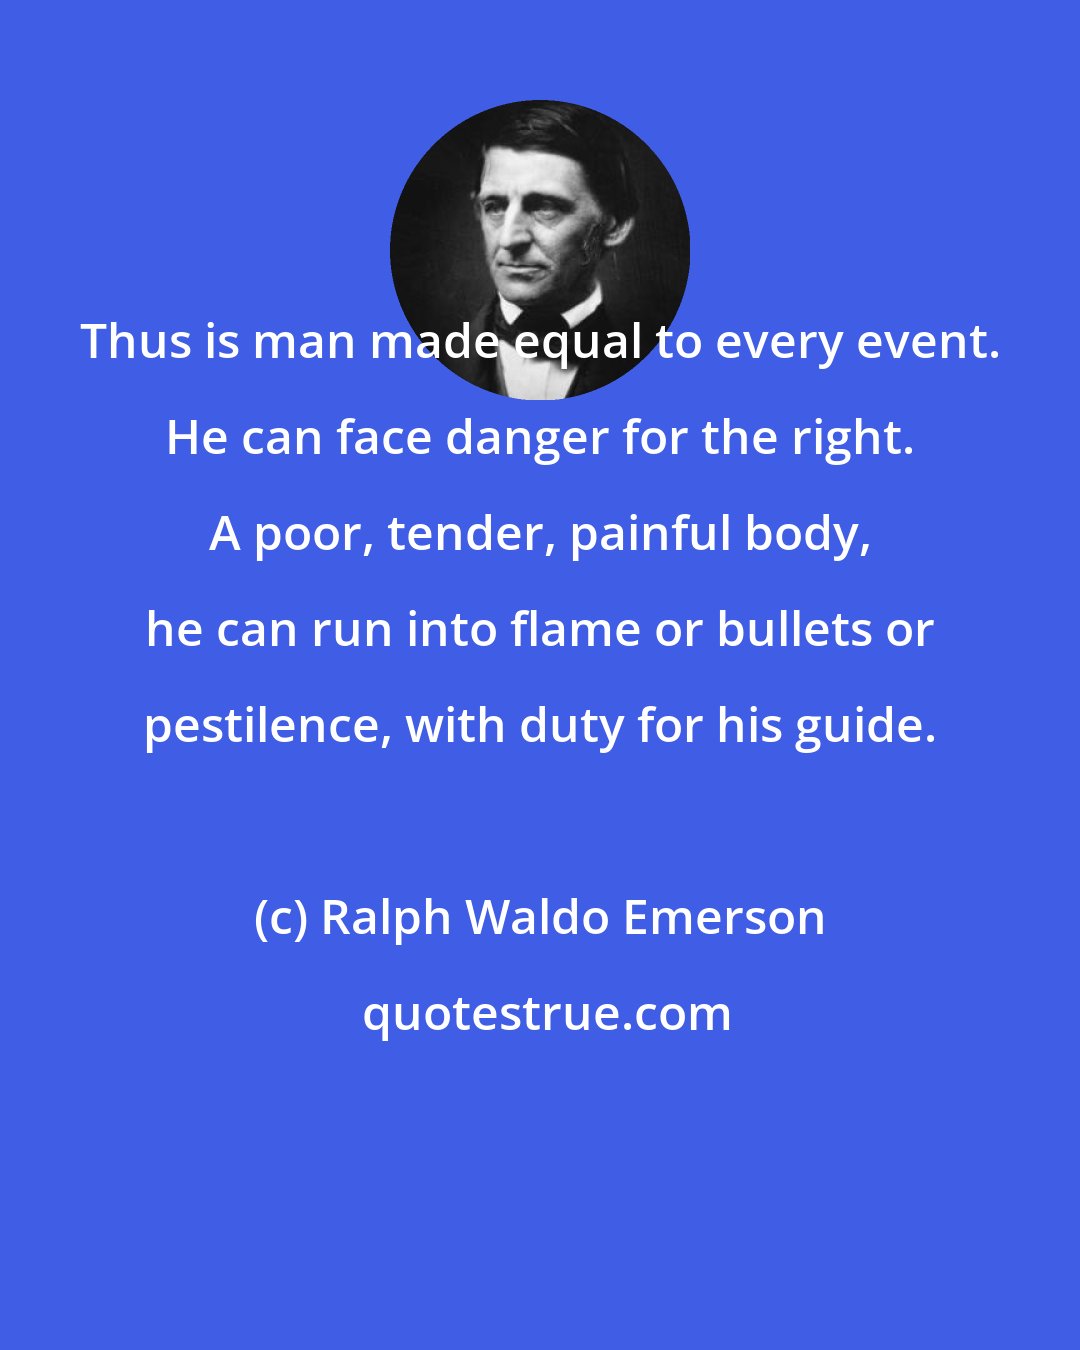 Ralph Waldo Emerson: Thus is man made equal to every event. He can face danger for the right. A poor, tender, painful body, he can run into flame or bullets or pestilence, with duty for his guide.